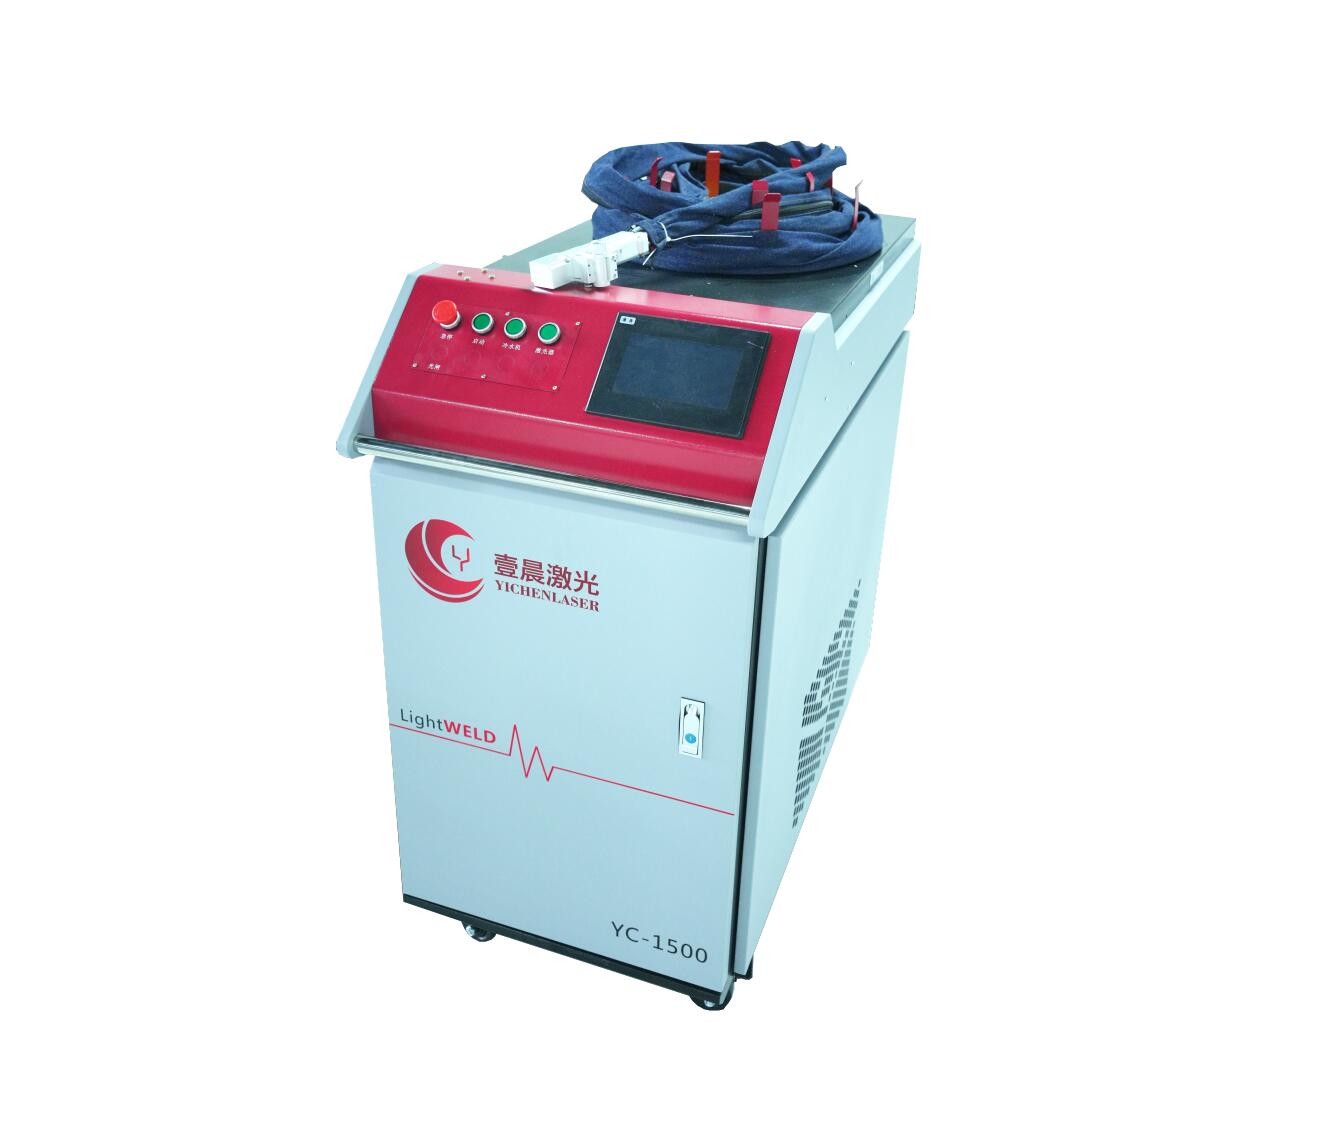 Buy Fiber Handheld Laser Cleaning Machine 2000w High Performance at wholesale prices